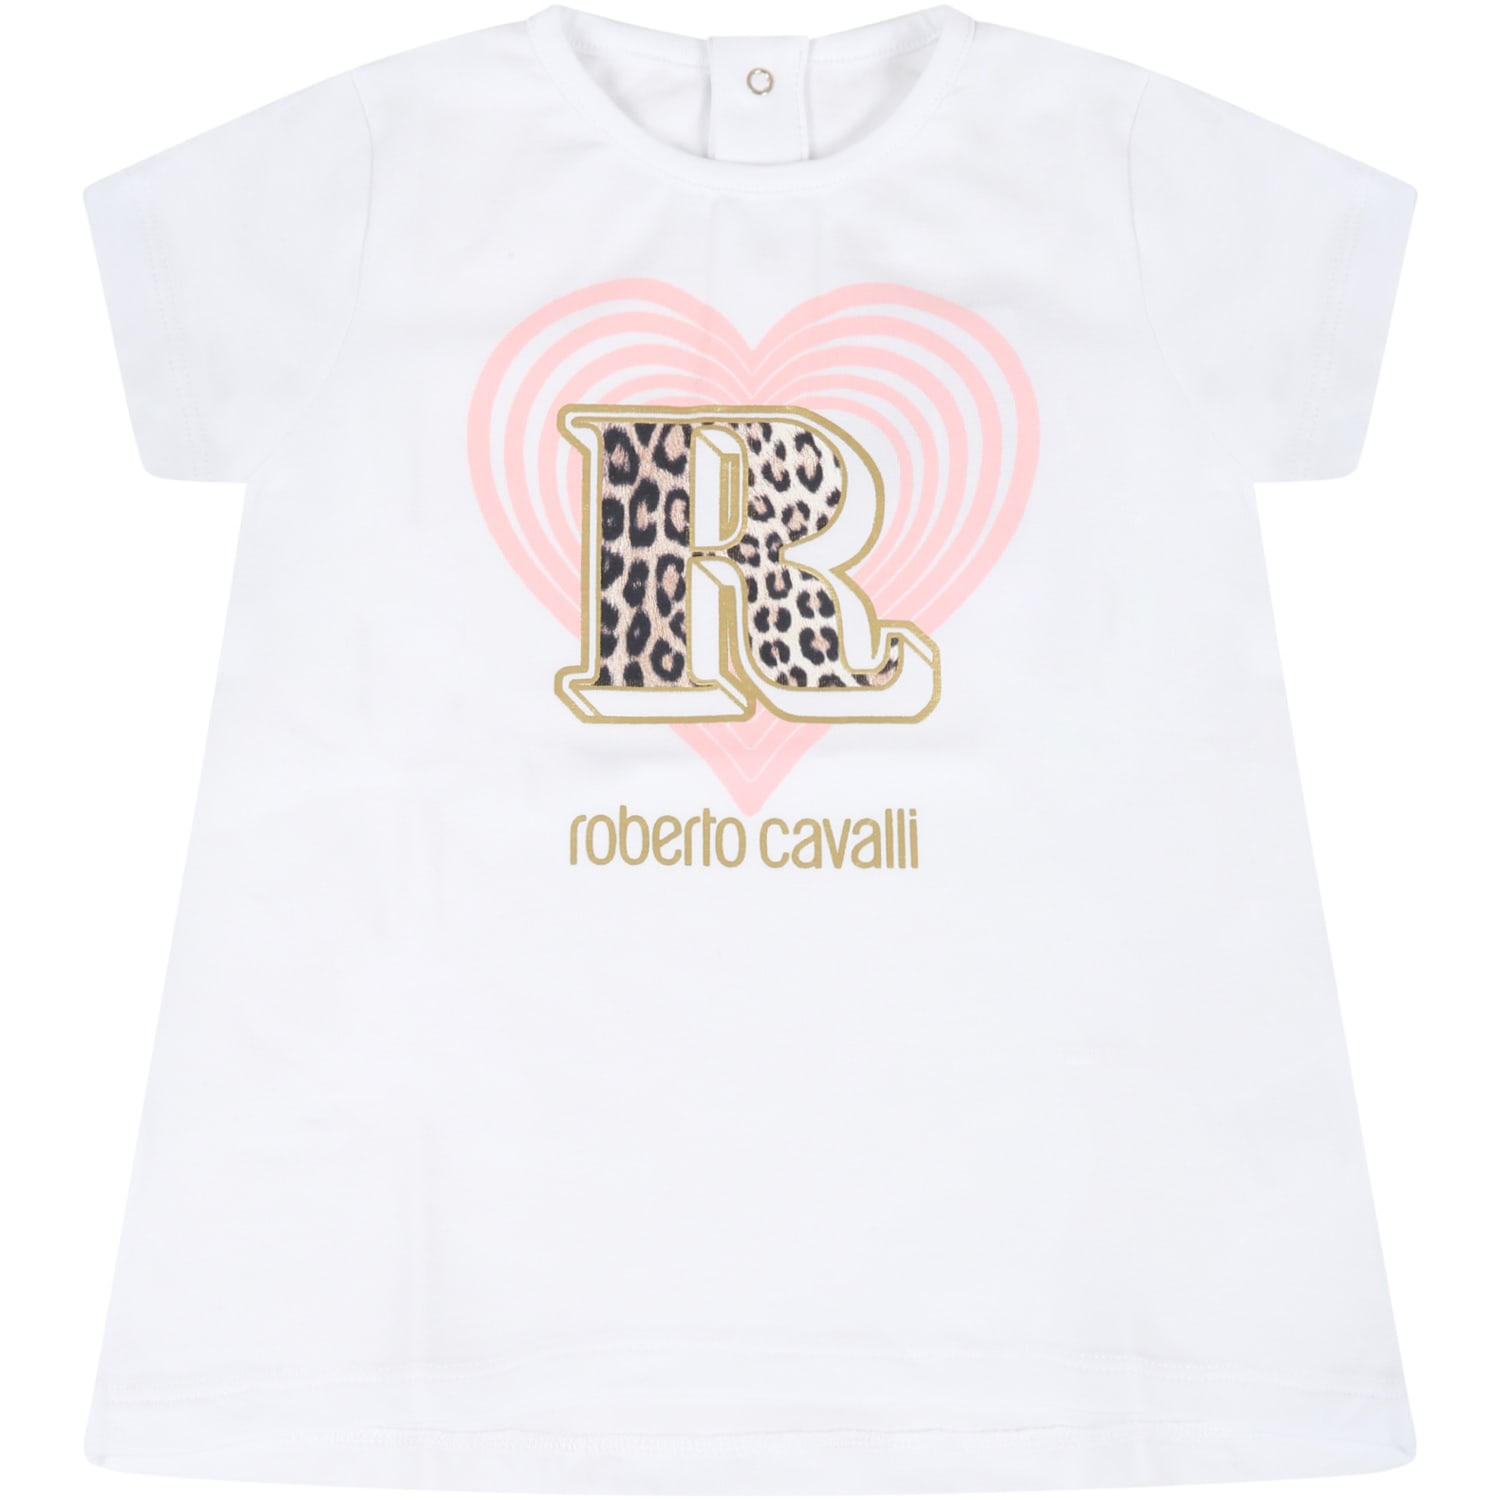 Roberto Cavalli White T-shirt For Baby Girl With Heart